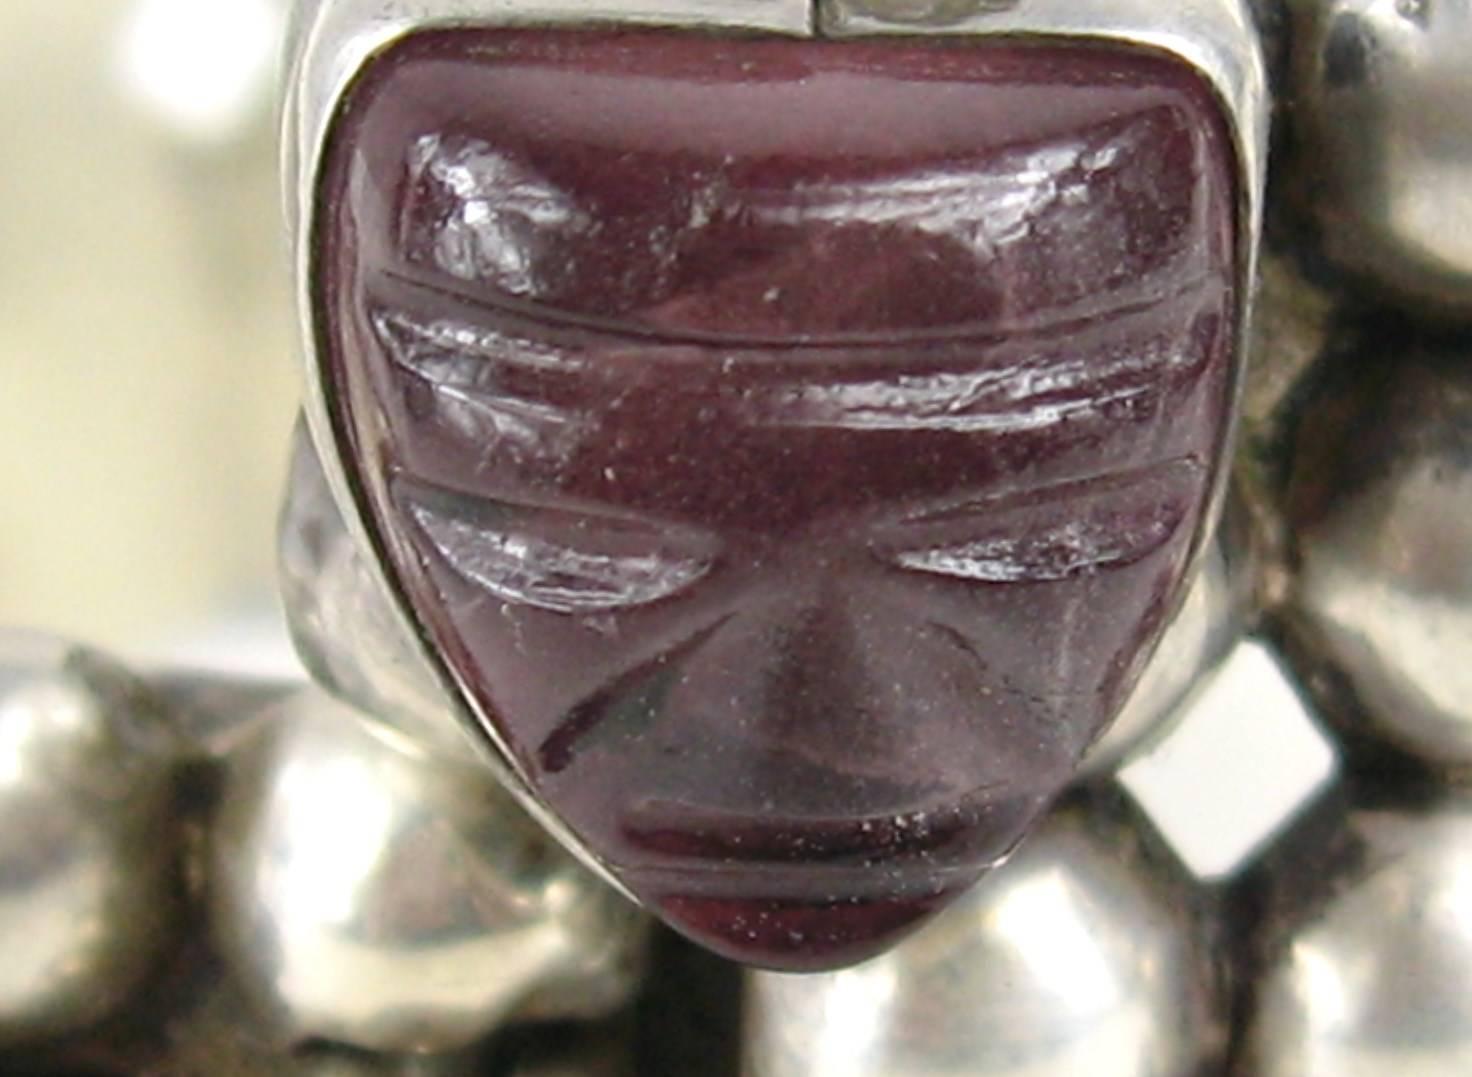 Vintage  Sterling Silver Mexican bracelet. This is amazing in person. Cabochon Round Amethyst Stones set in the bracelet. Main Focus is the carved faces in the front. Measuring 1.05 wide back of bracelet..1.60 wide on the front (head to head) Safety